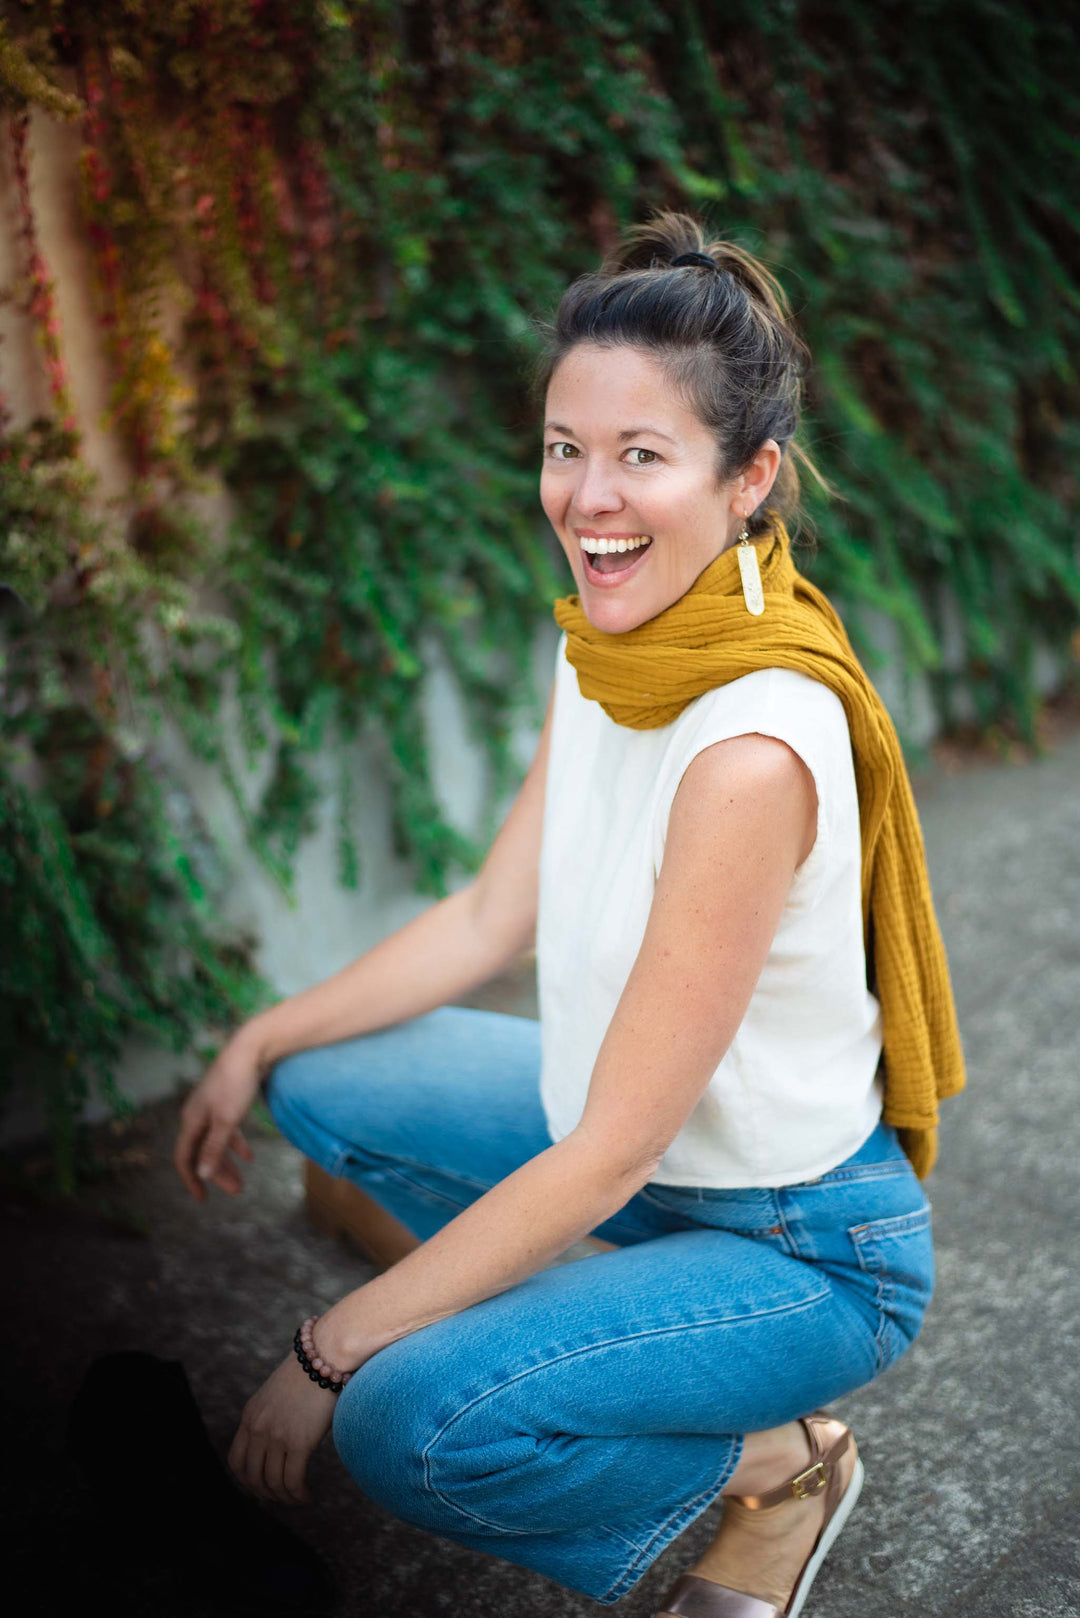 Woman crouches down on pavement wearing gold scarf draped down her back, white top and jeans.